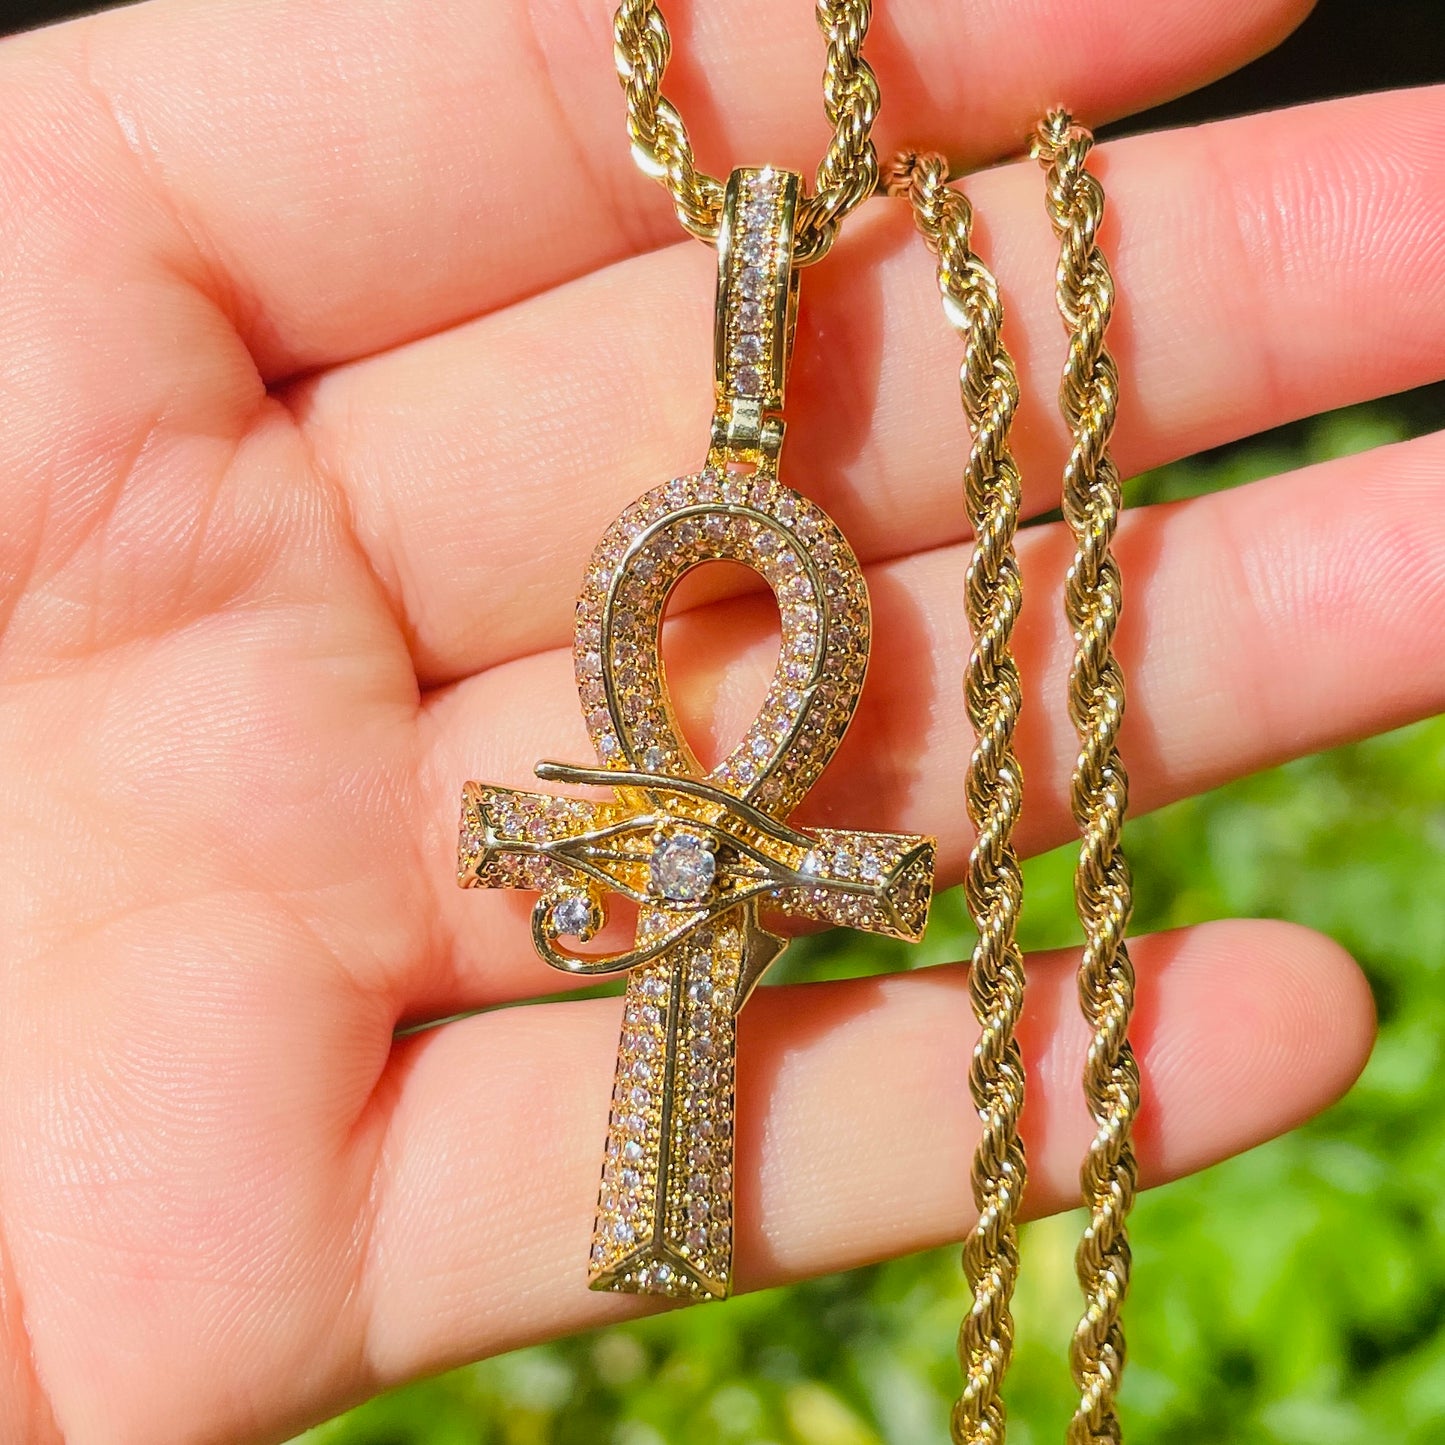 5pcs/lot 18/20/24 inch Stainless Steel Rope Chain CZ Pave Egypt Eyes of Horus ANKH Cross Necklace Gold Necklaces Charms Beads Beyond